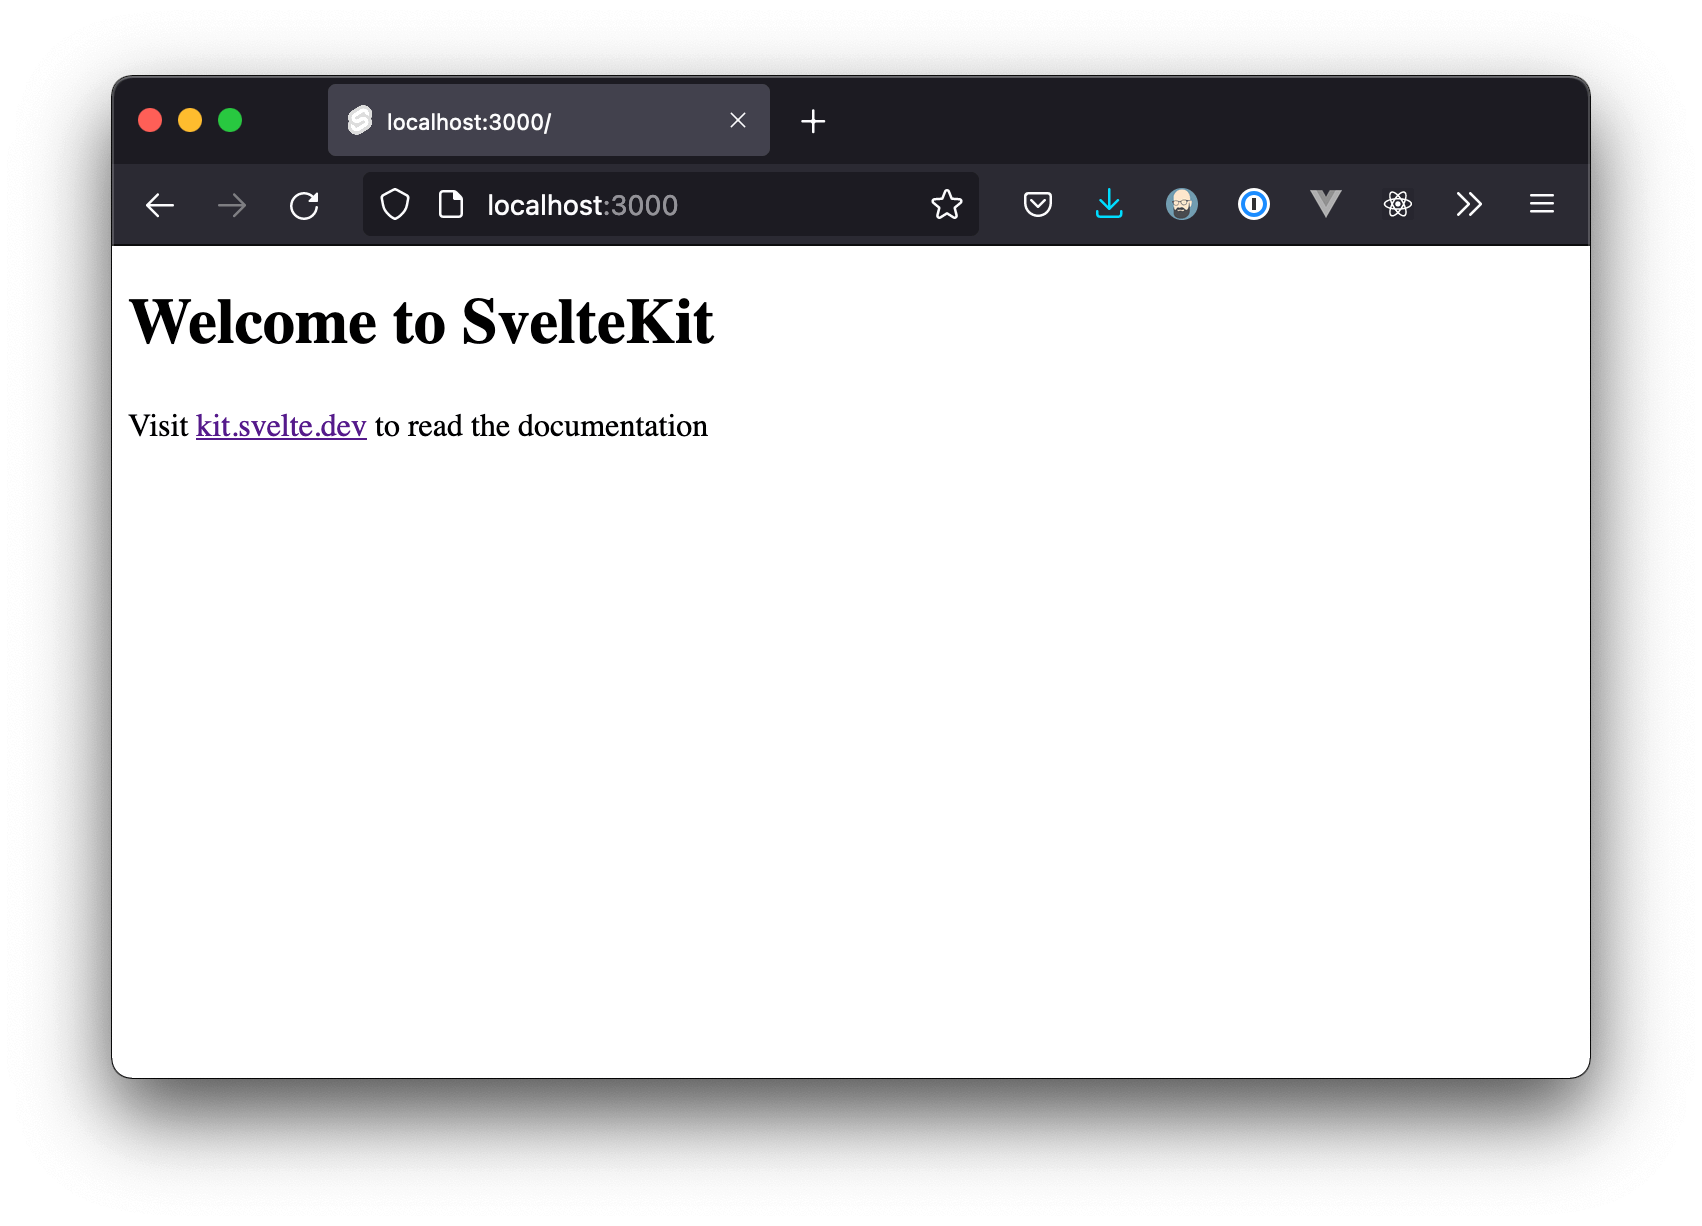 The default welcome page for a new SvelteKit project